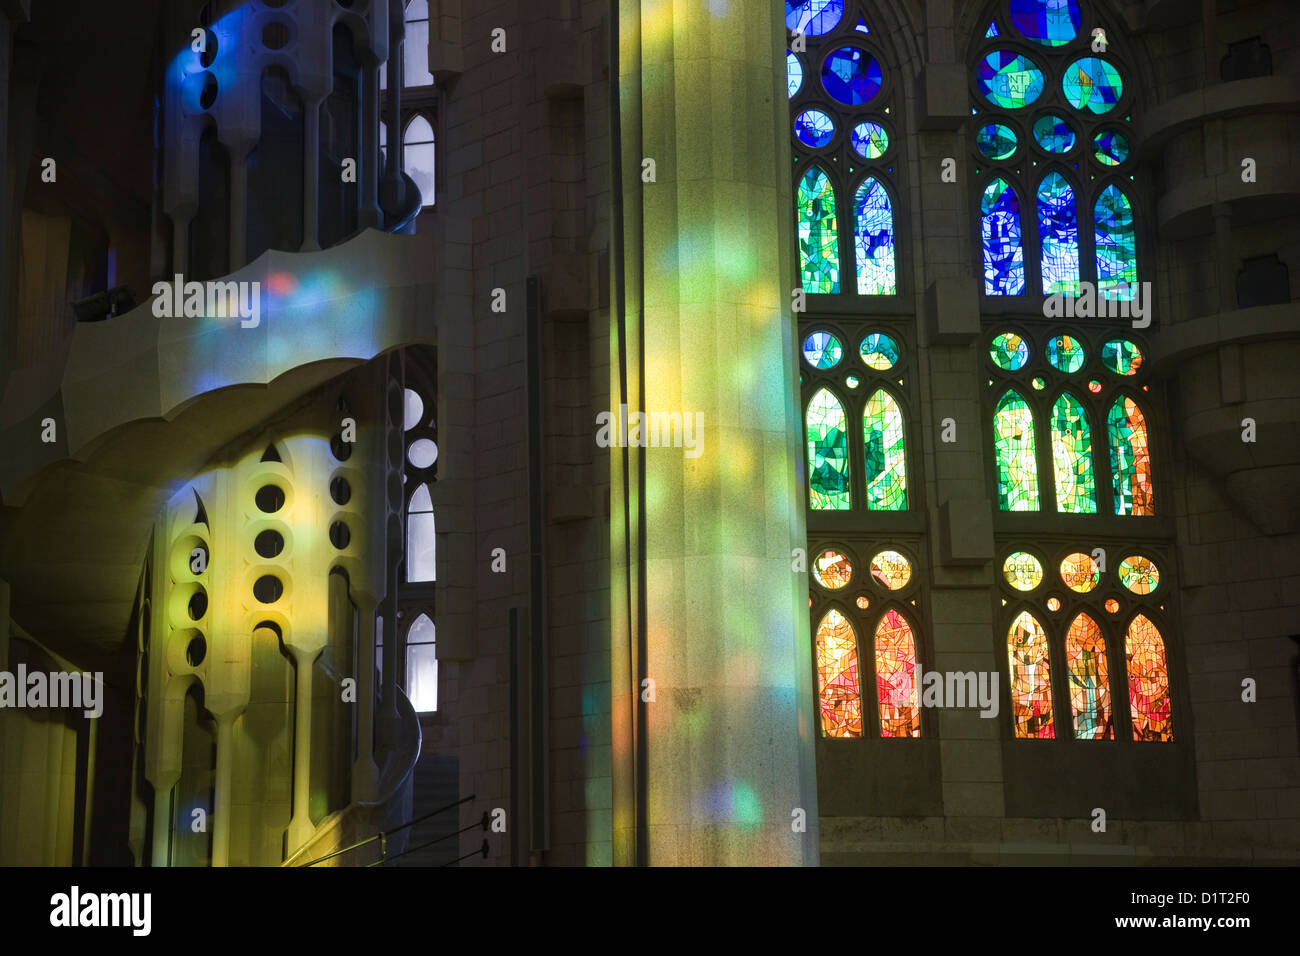 Inside the Sagrada Familia showing stained glass windows and stone columns, Barcelona, Spain Stock Photo